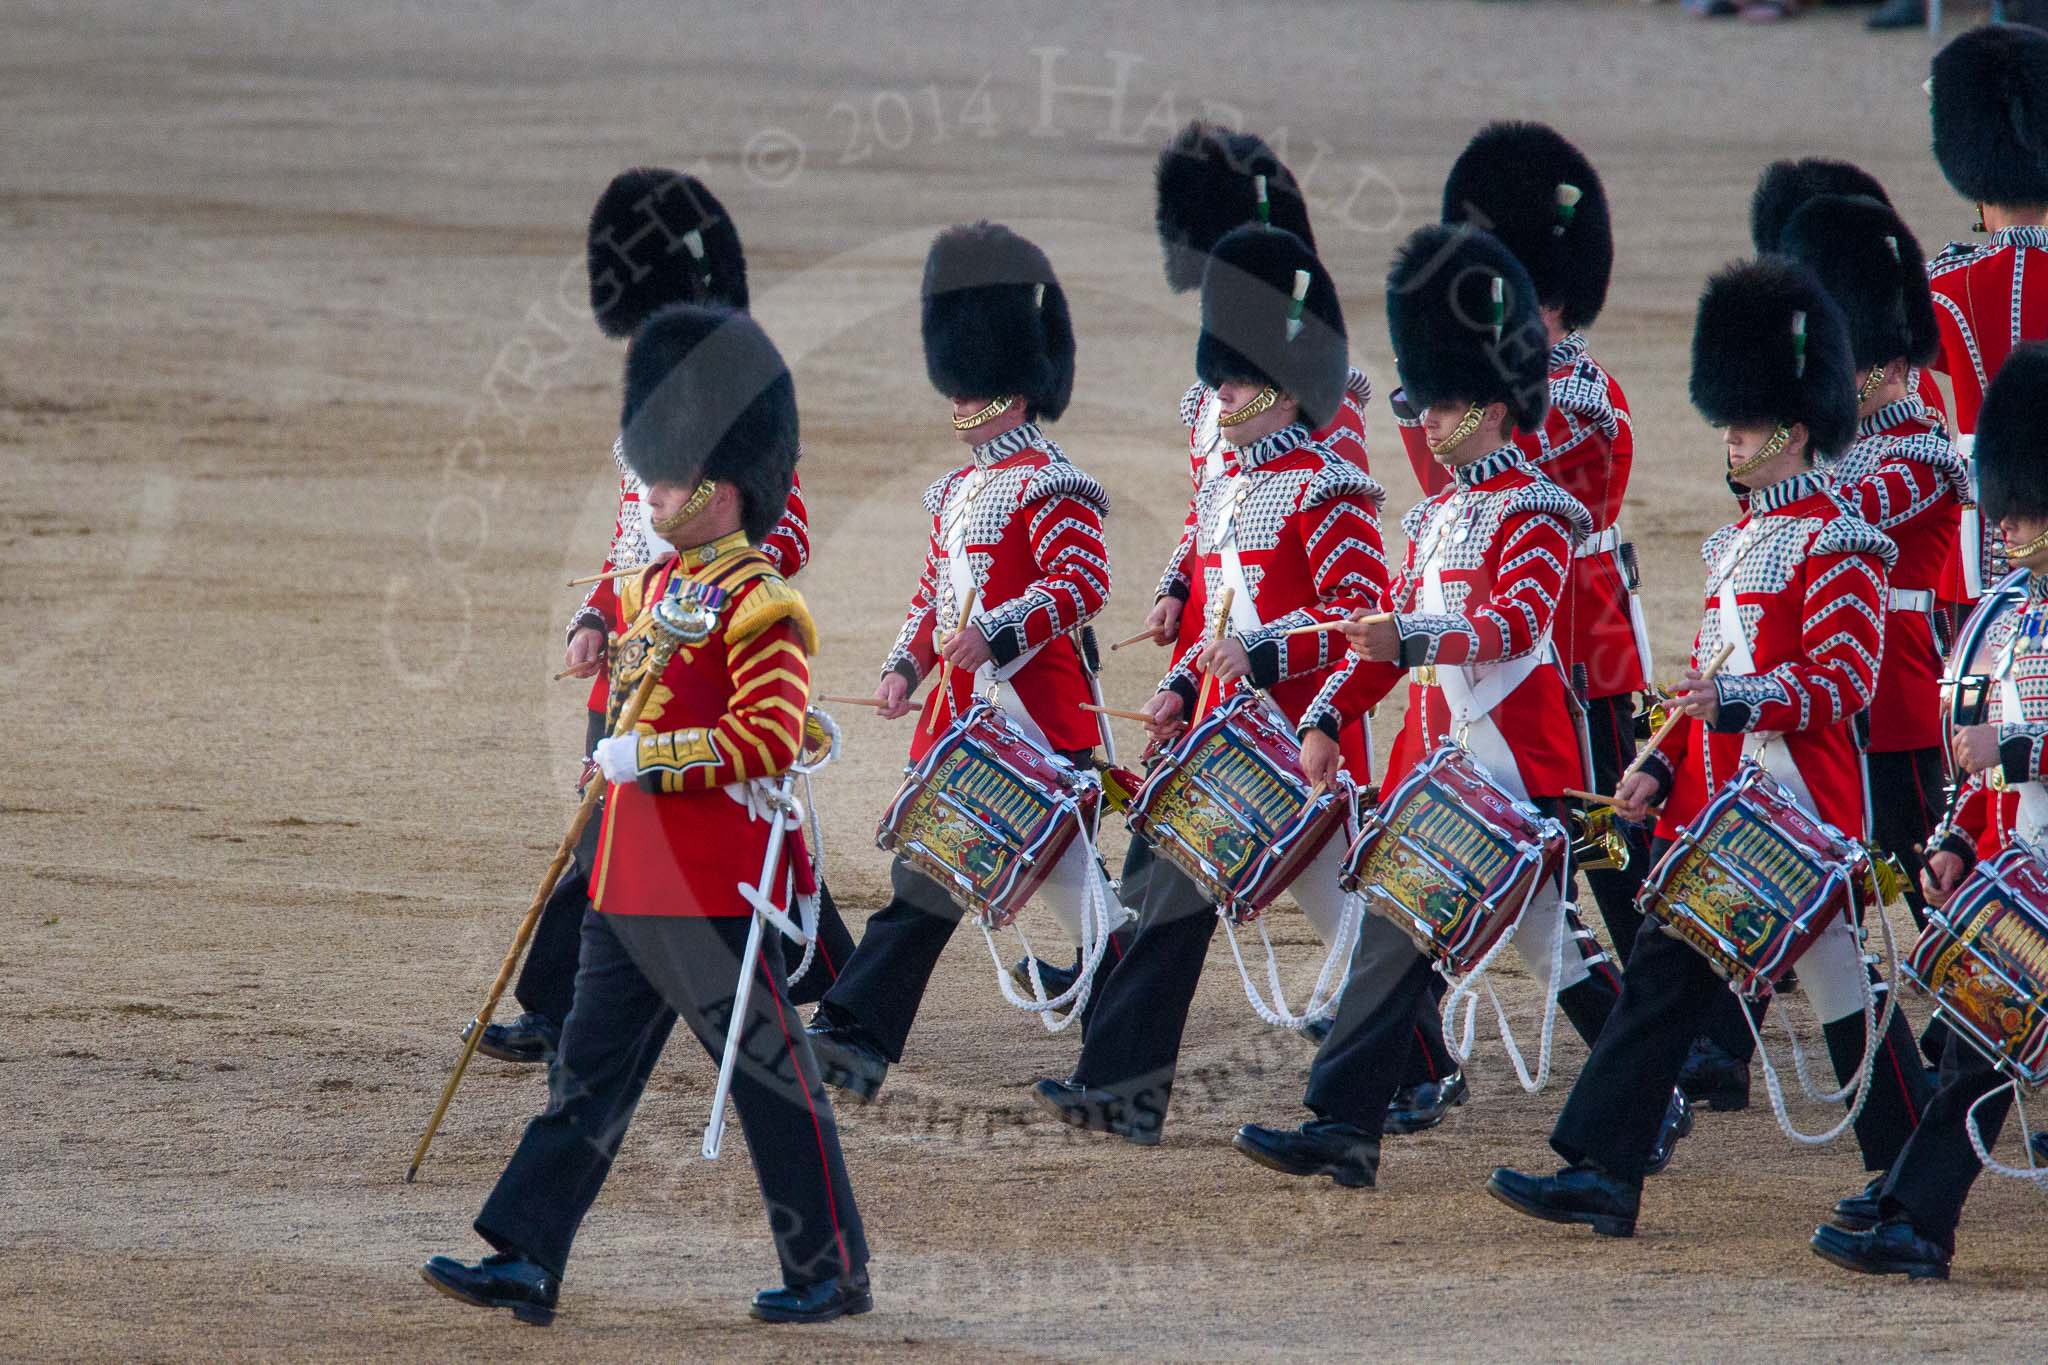 Beating Retreat 2014.
Horse Guards Parade, Westminster,
London SW1A,

United Kingdom,
on 11 June 2014 at 21:03, image #257